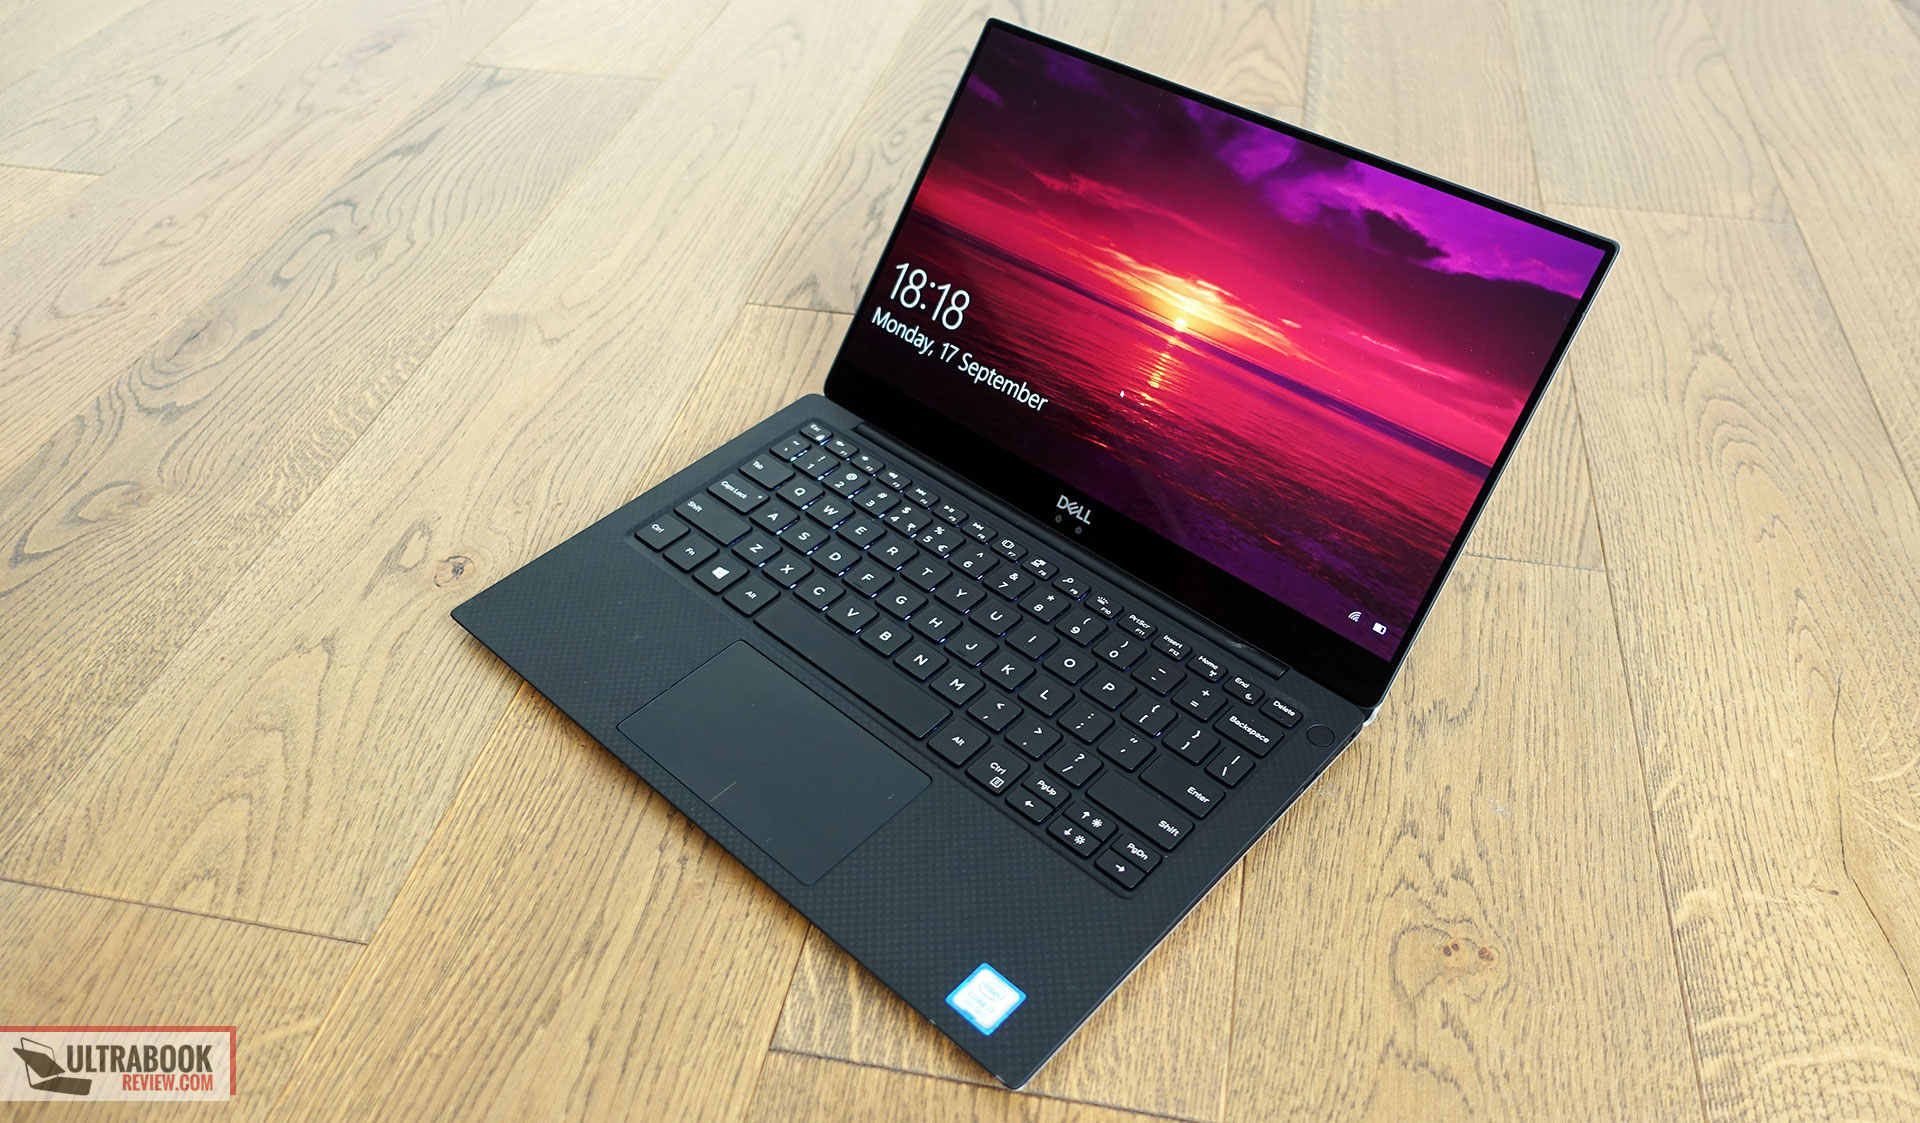 Dell XPS 13 9370 review (i7-8550U, FHD screen) - an upgrade, but ...